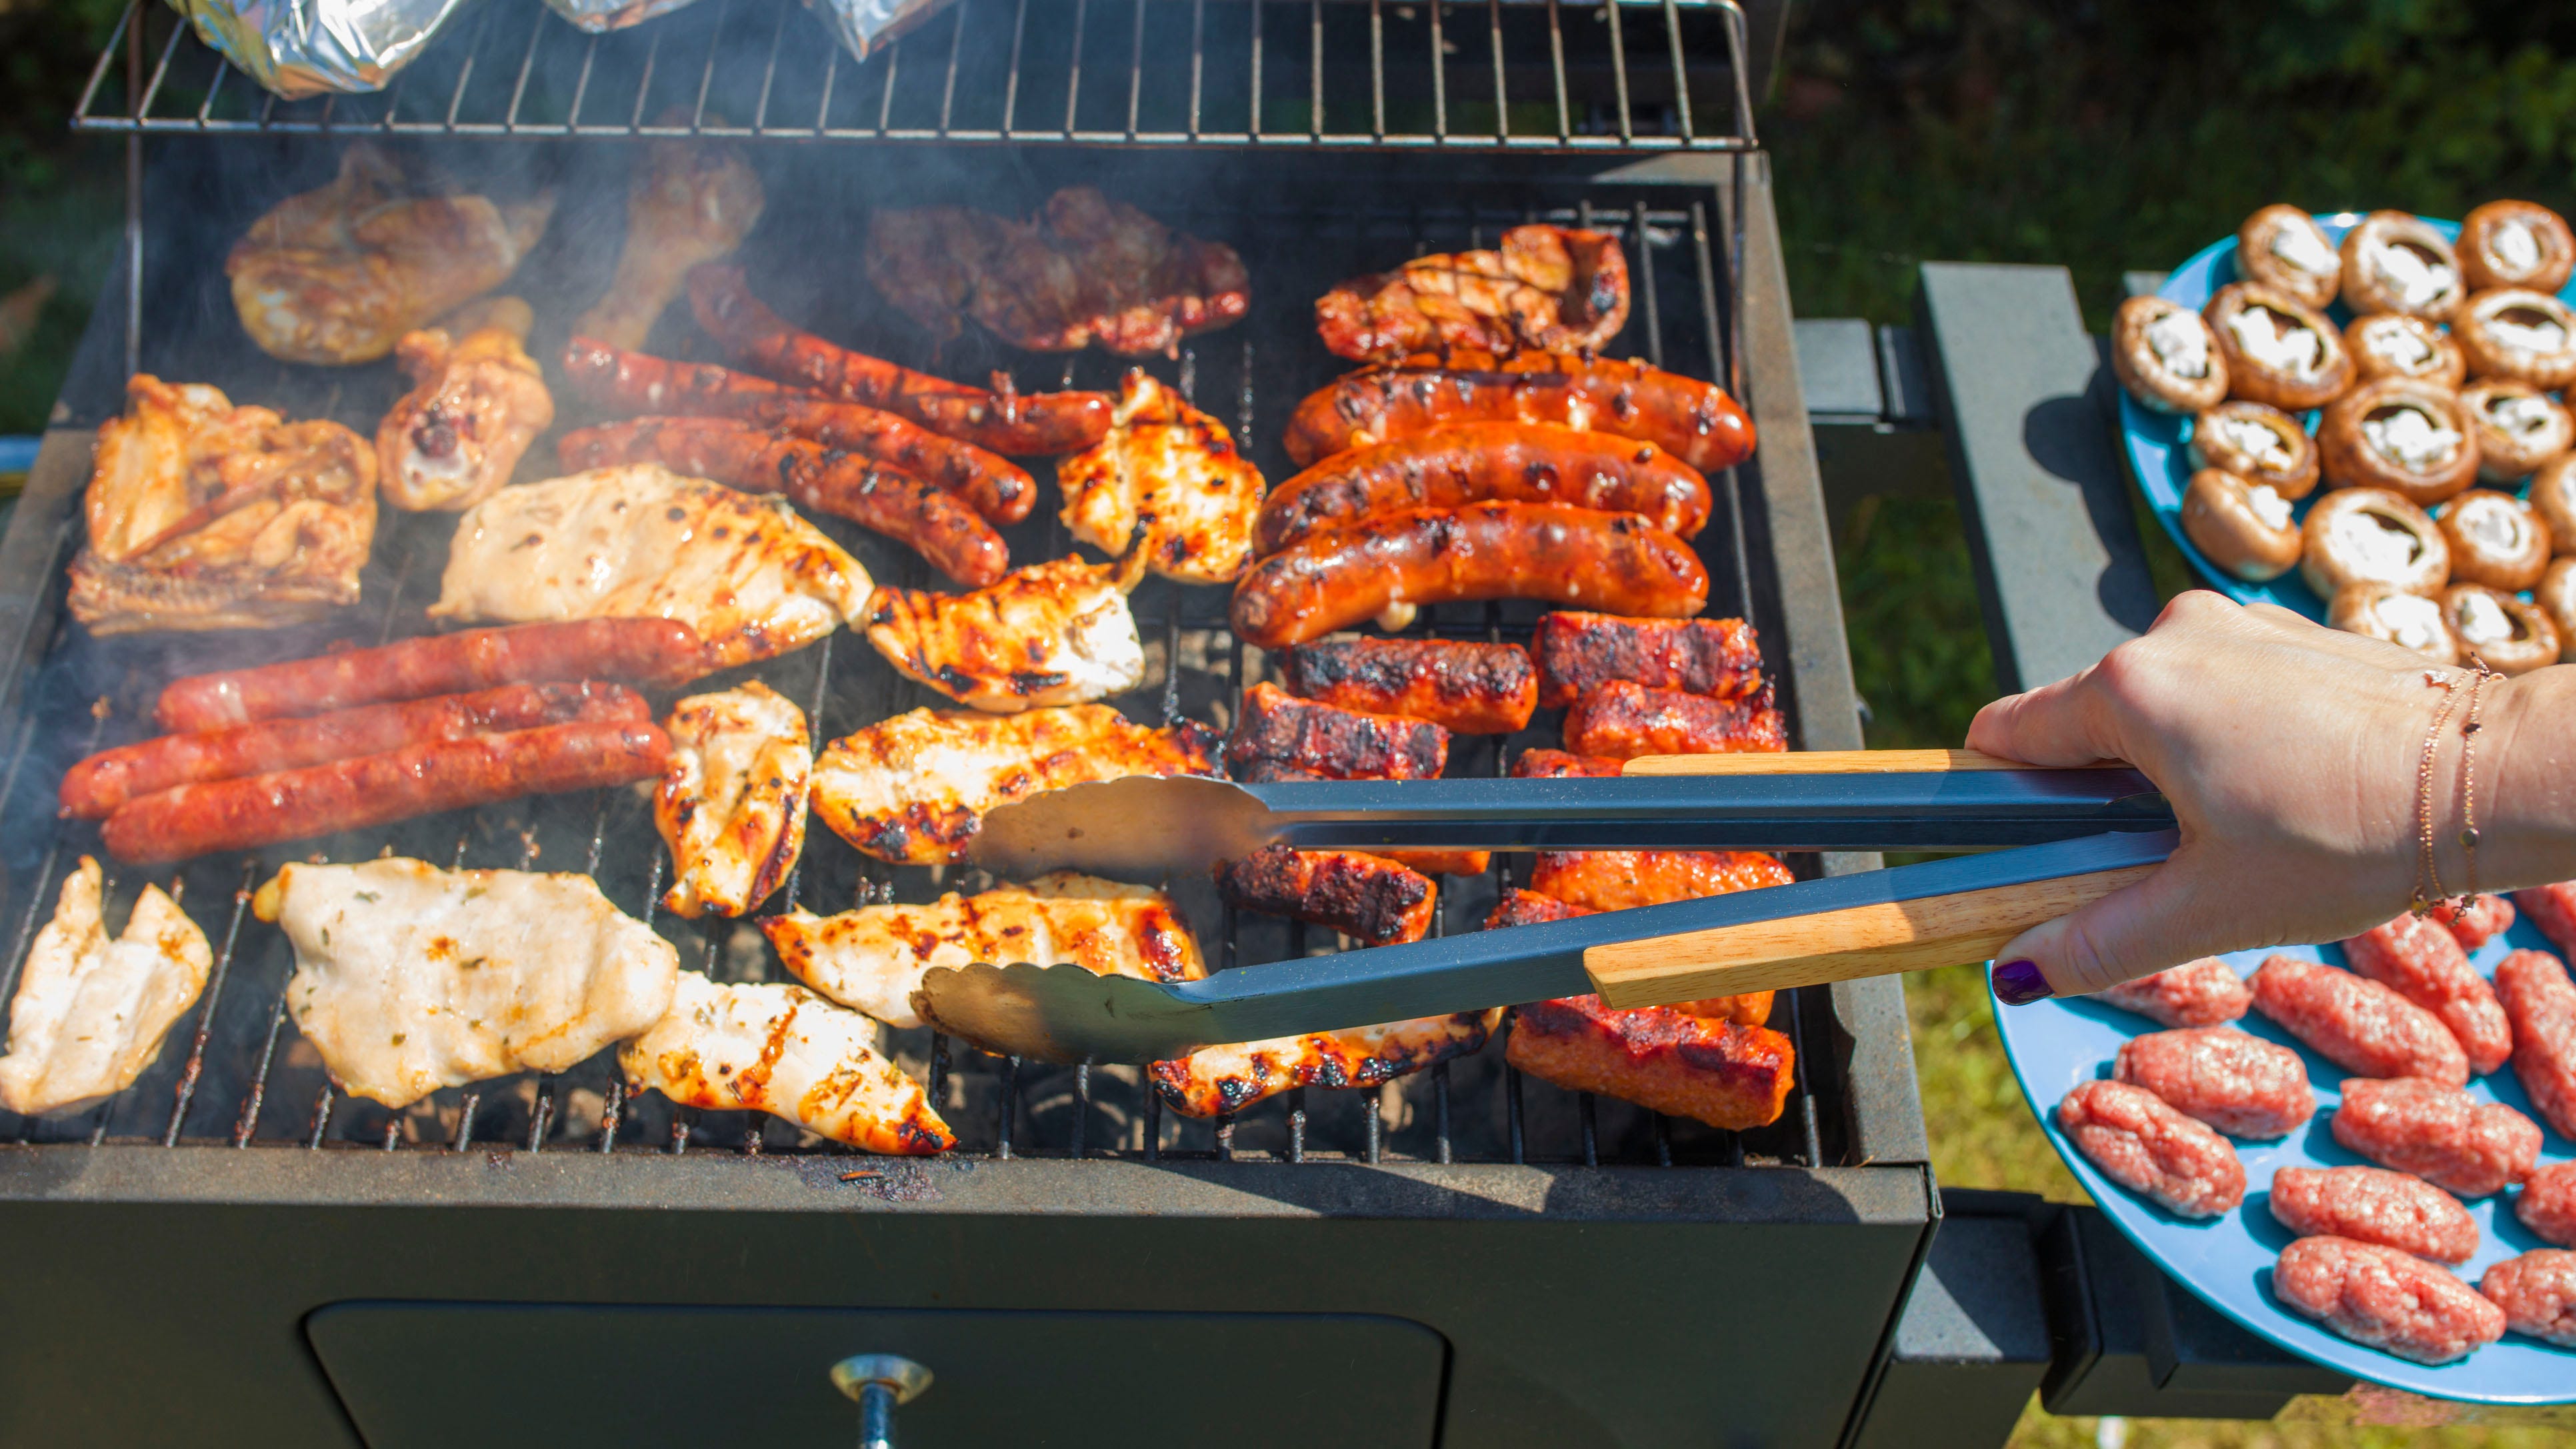 21 Grilling Mistakes and How to Avoid Them